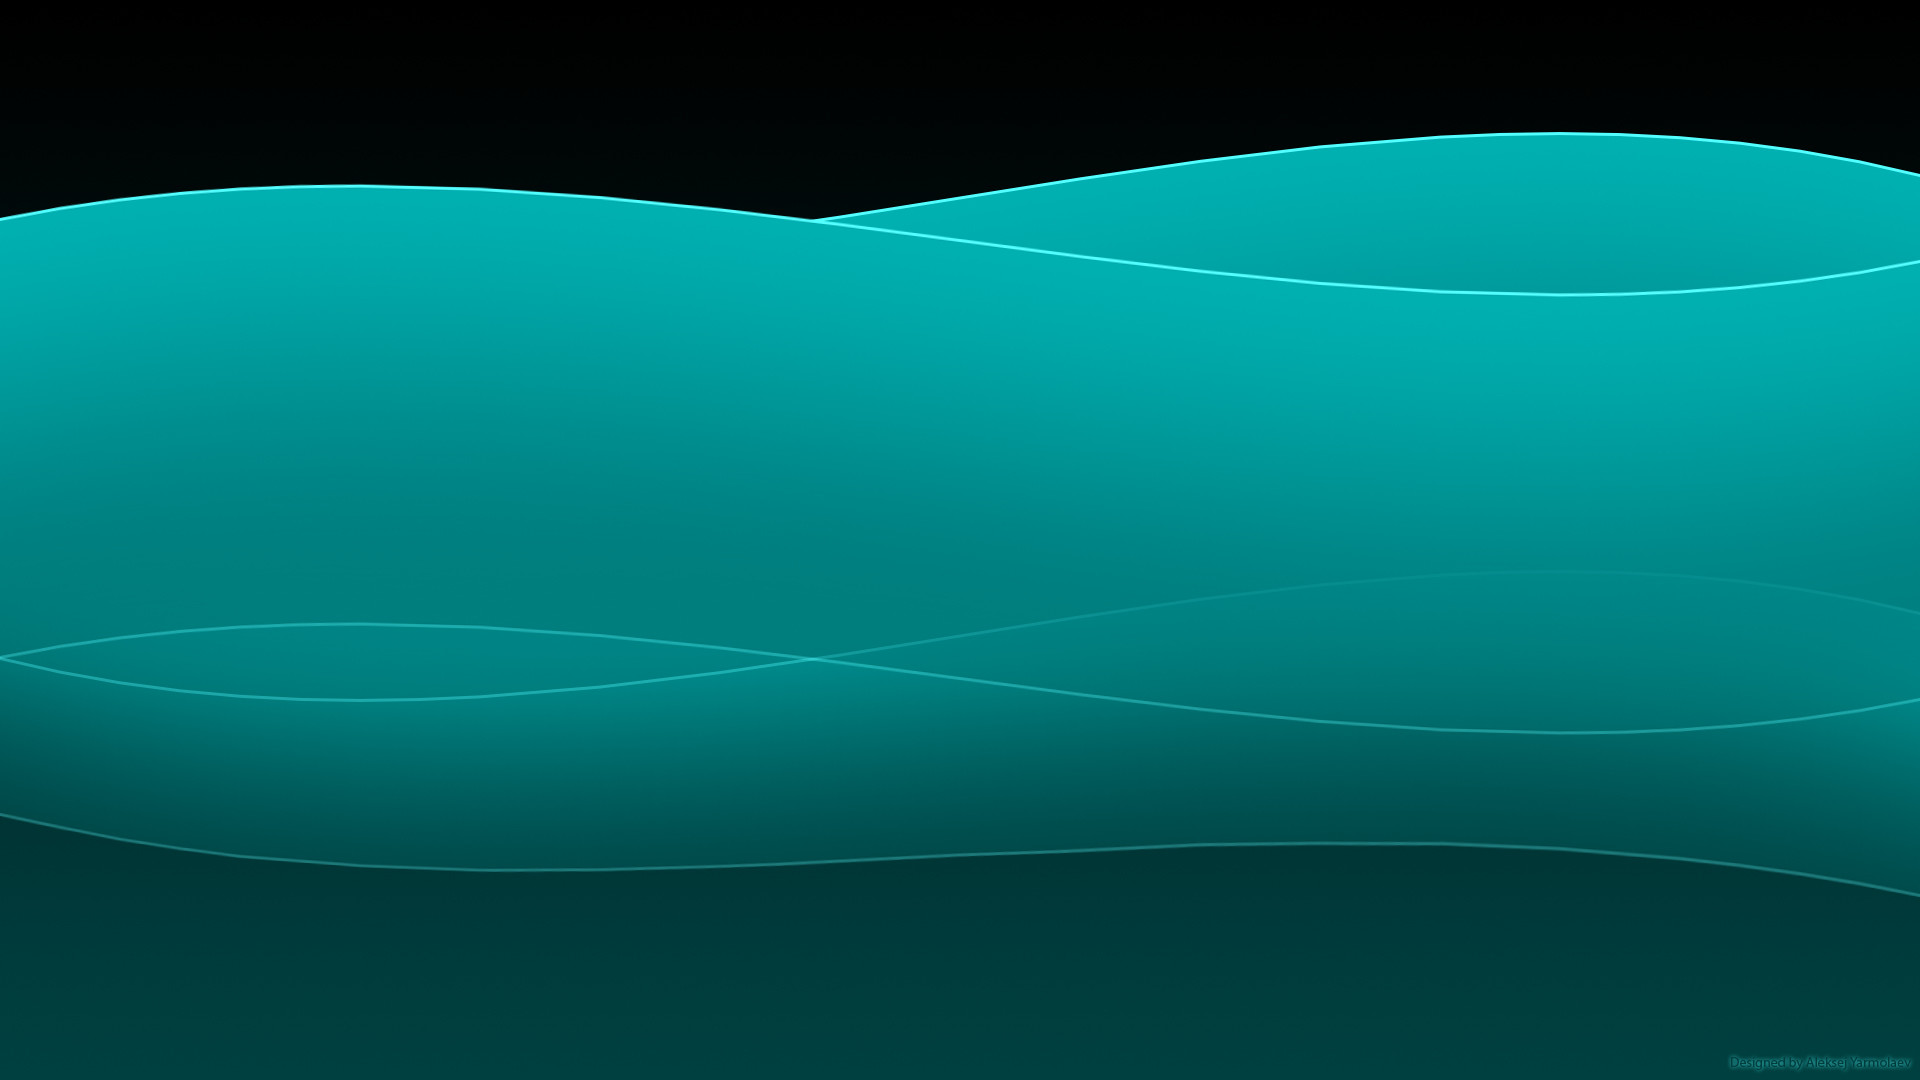 1920x1080 Turquoise And Black Wallpaper - Desktop Backgrounds